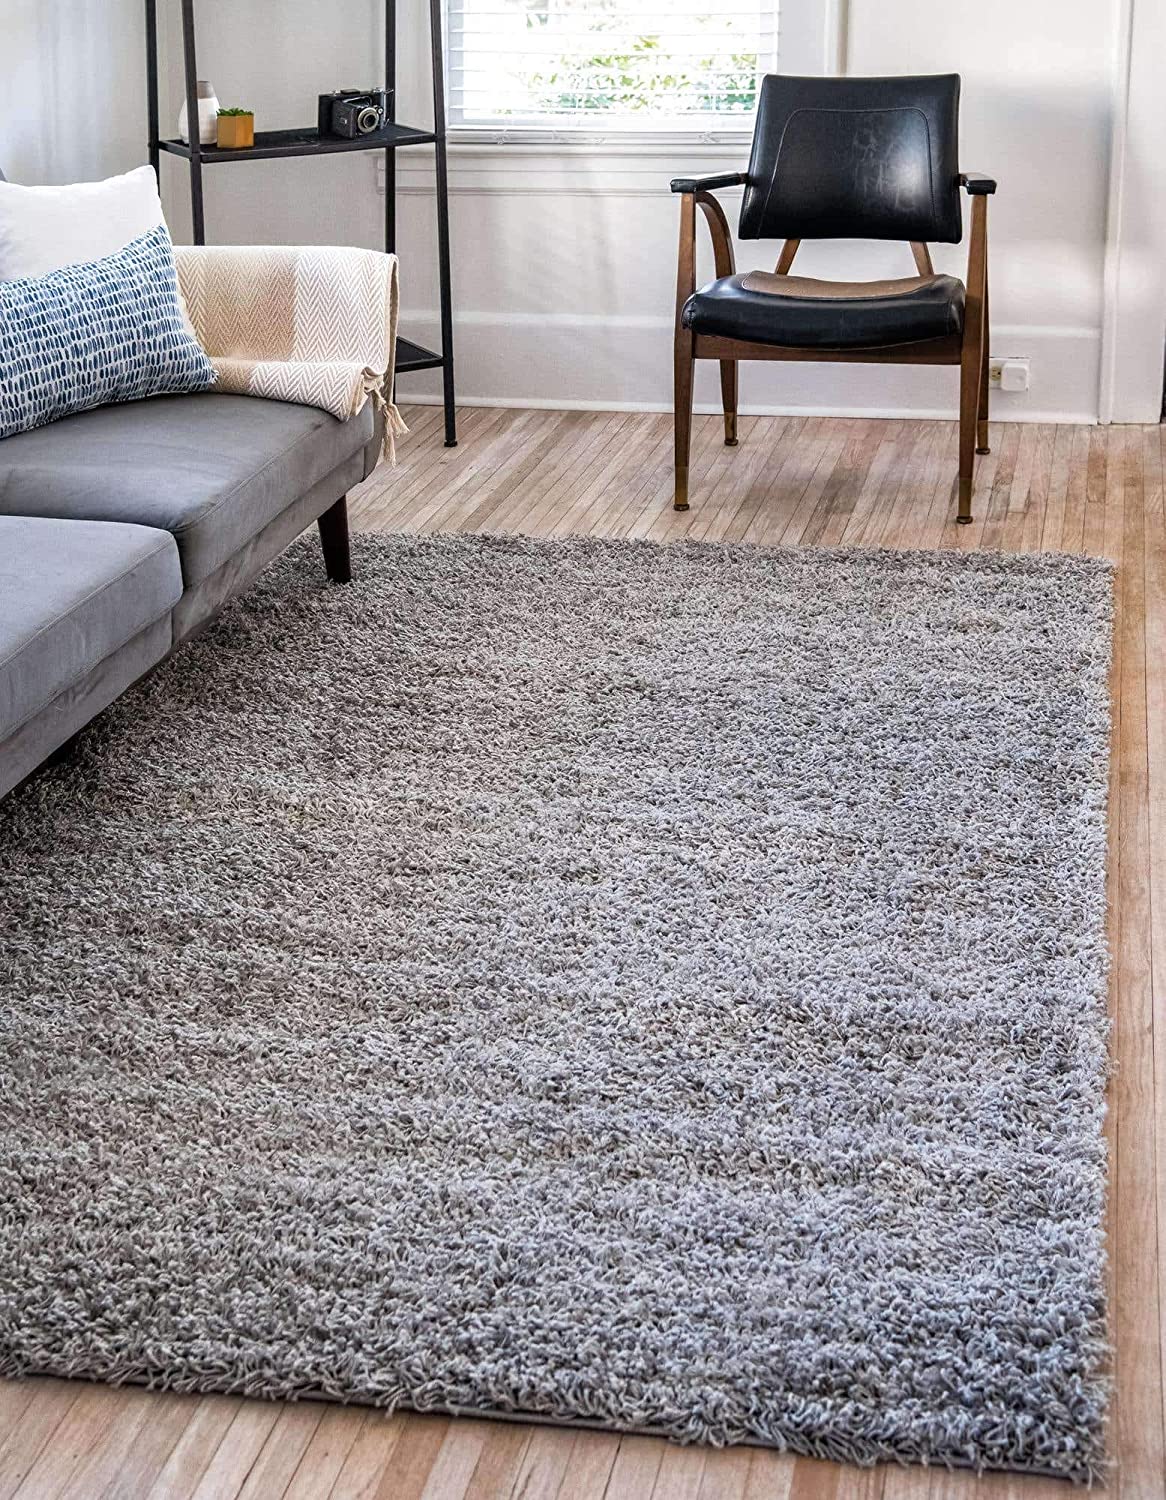 Top 10 best Outrageous Rugs you will like in 2020